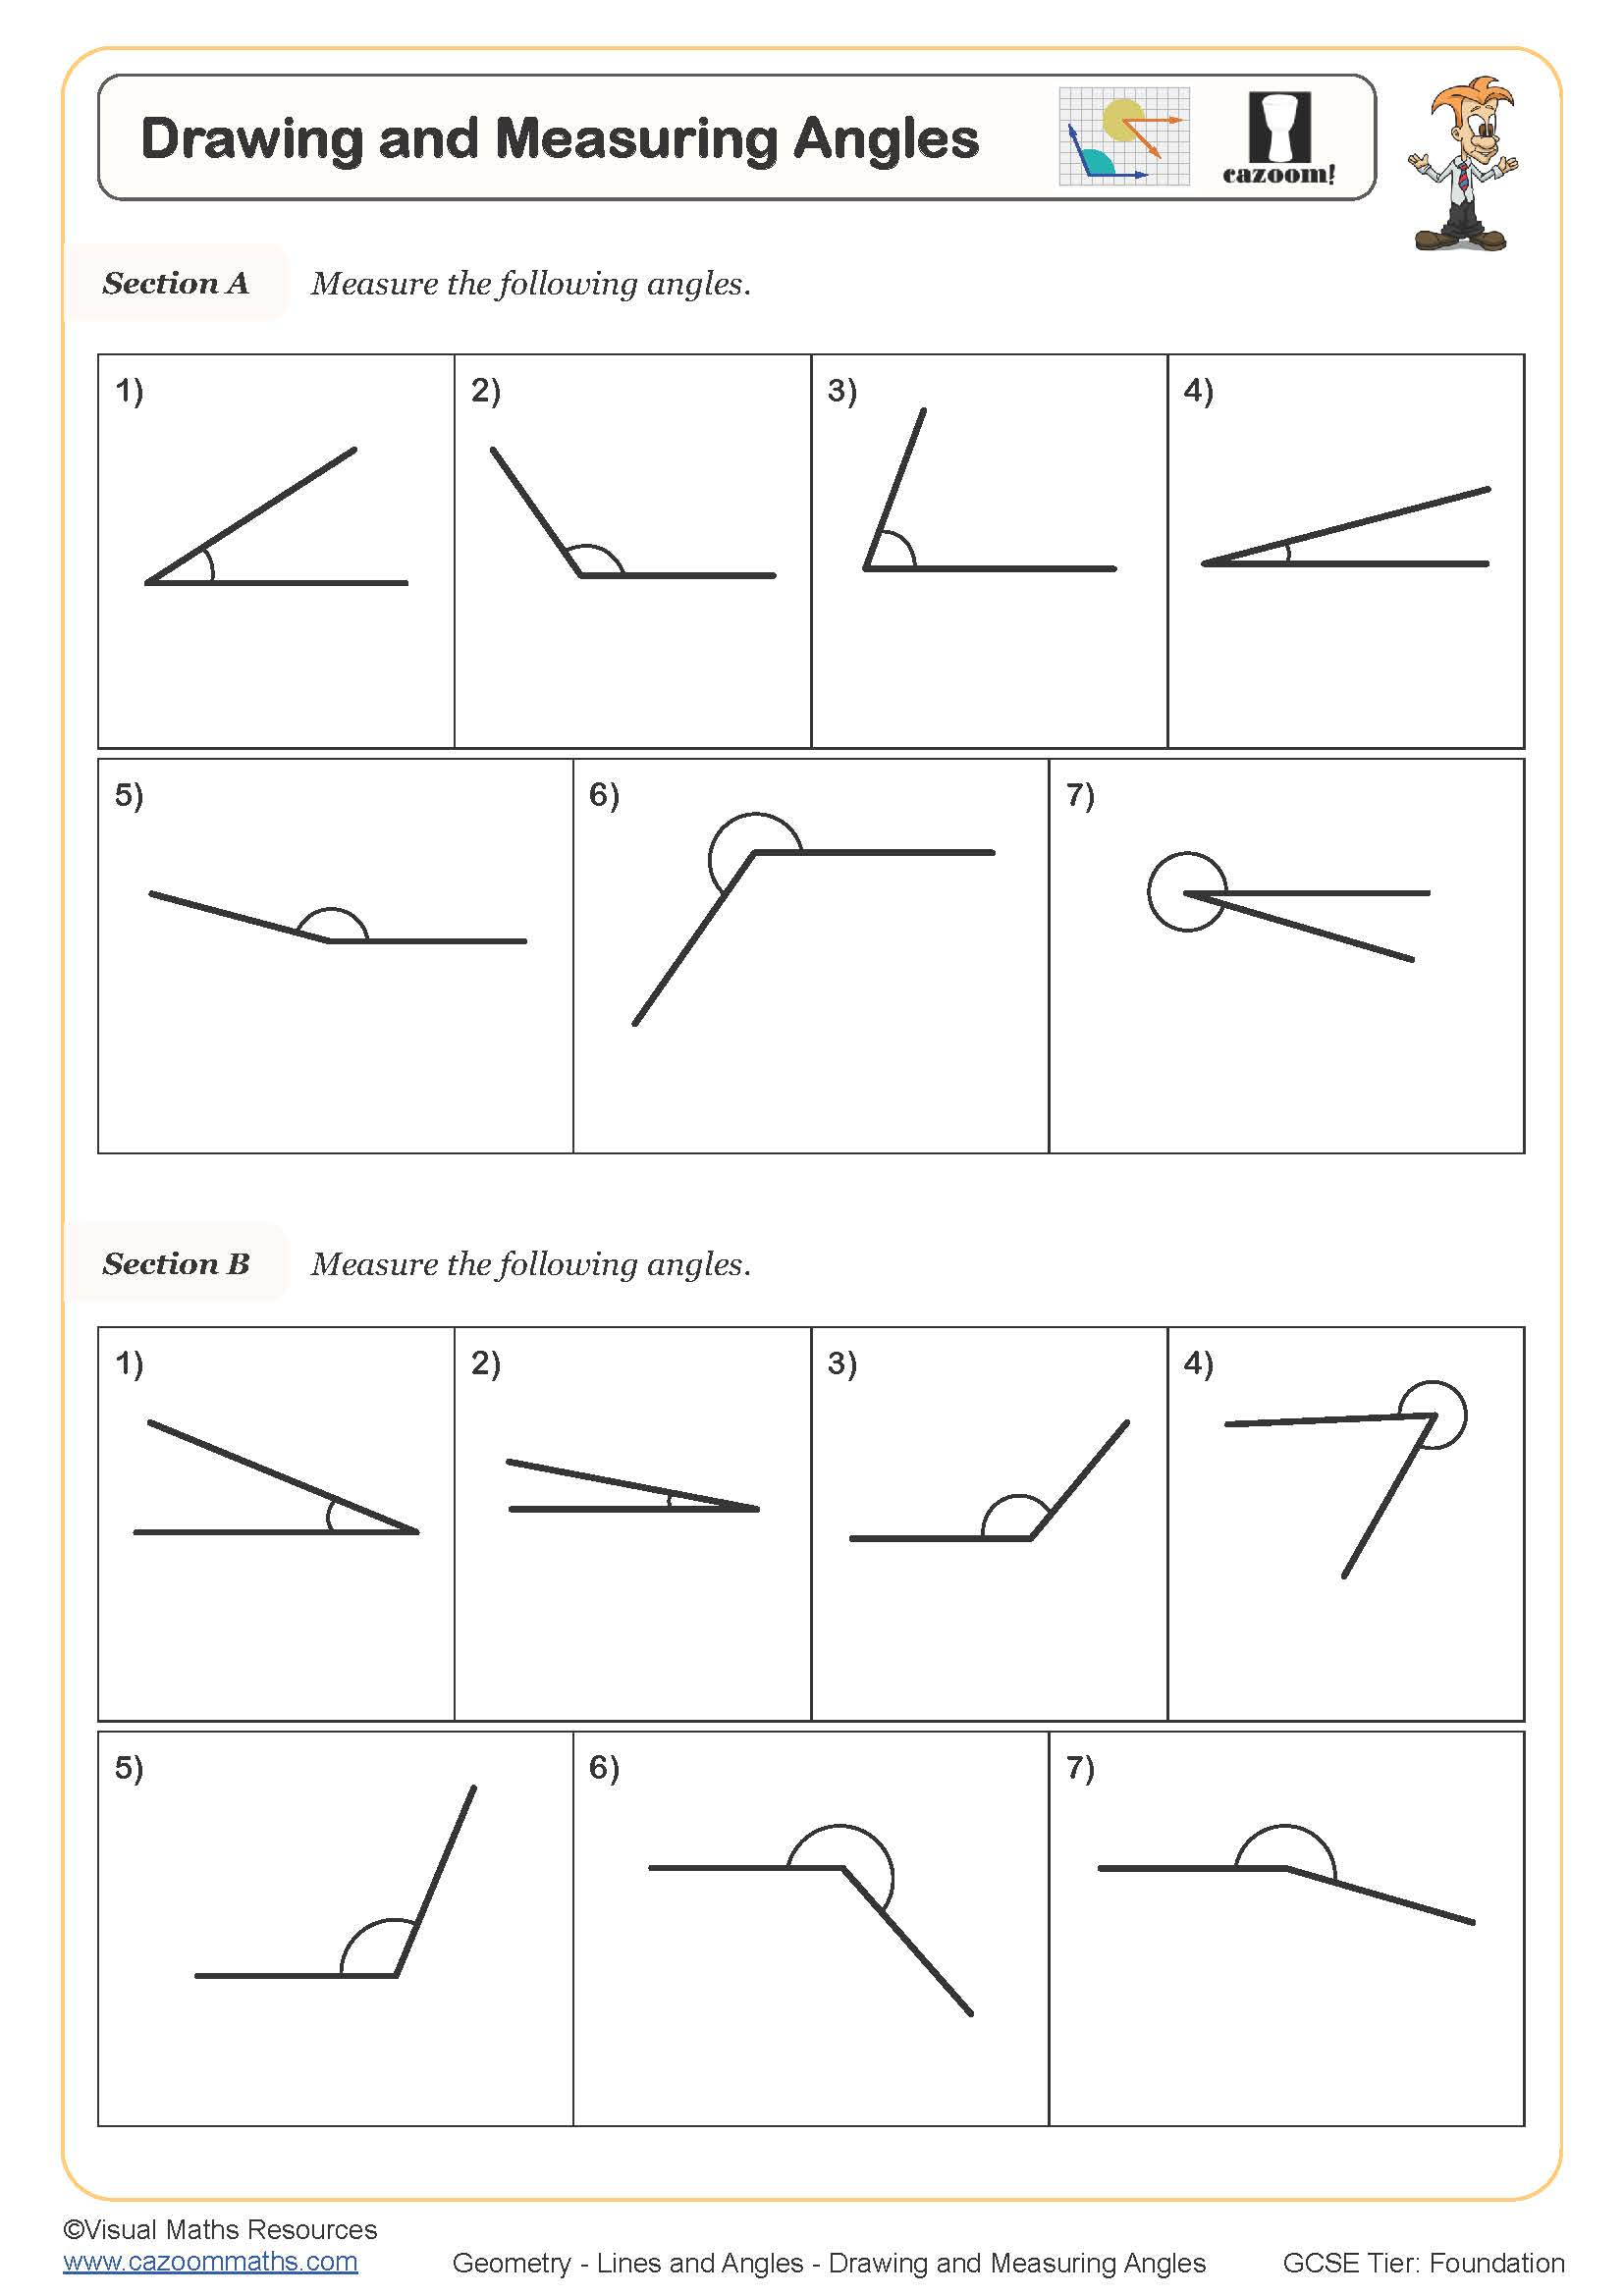 Drawing and Measuring Angles Worksheet fit for students in year 7 and year 8